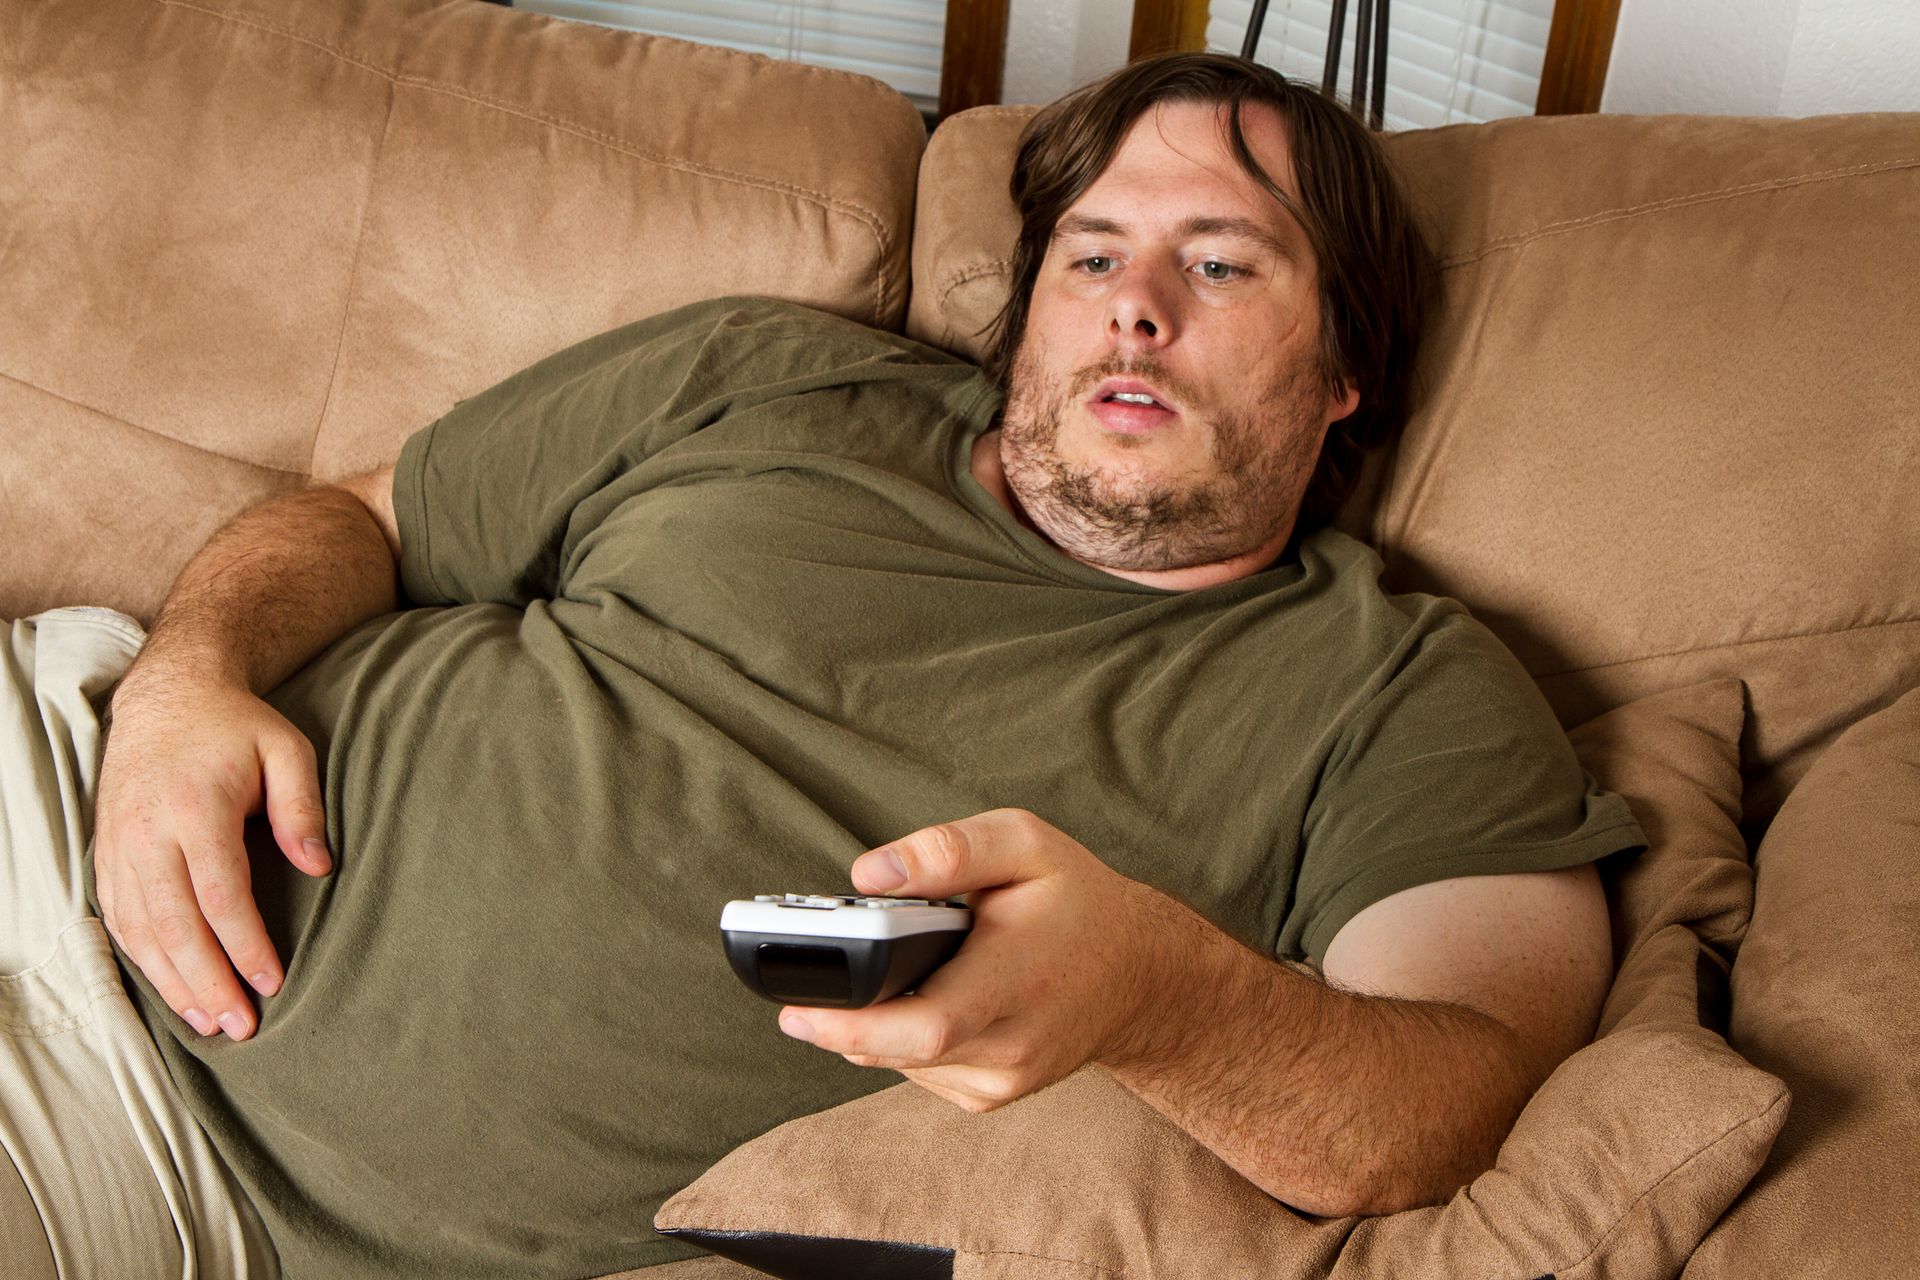 An overweight lazy man on a couch with a remote in his hands.